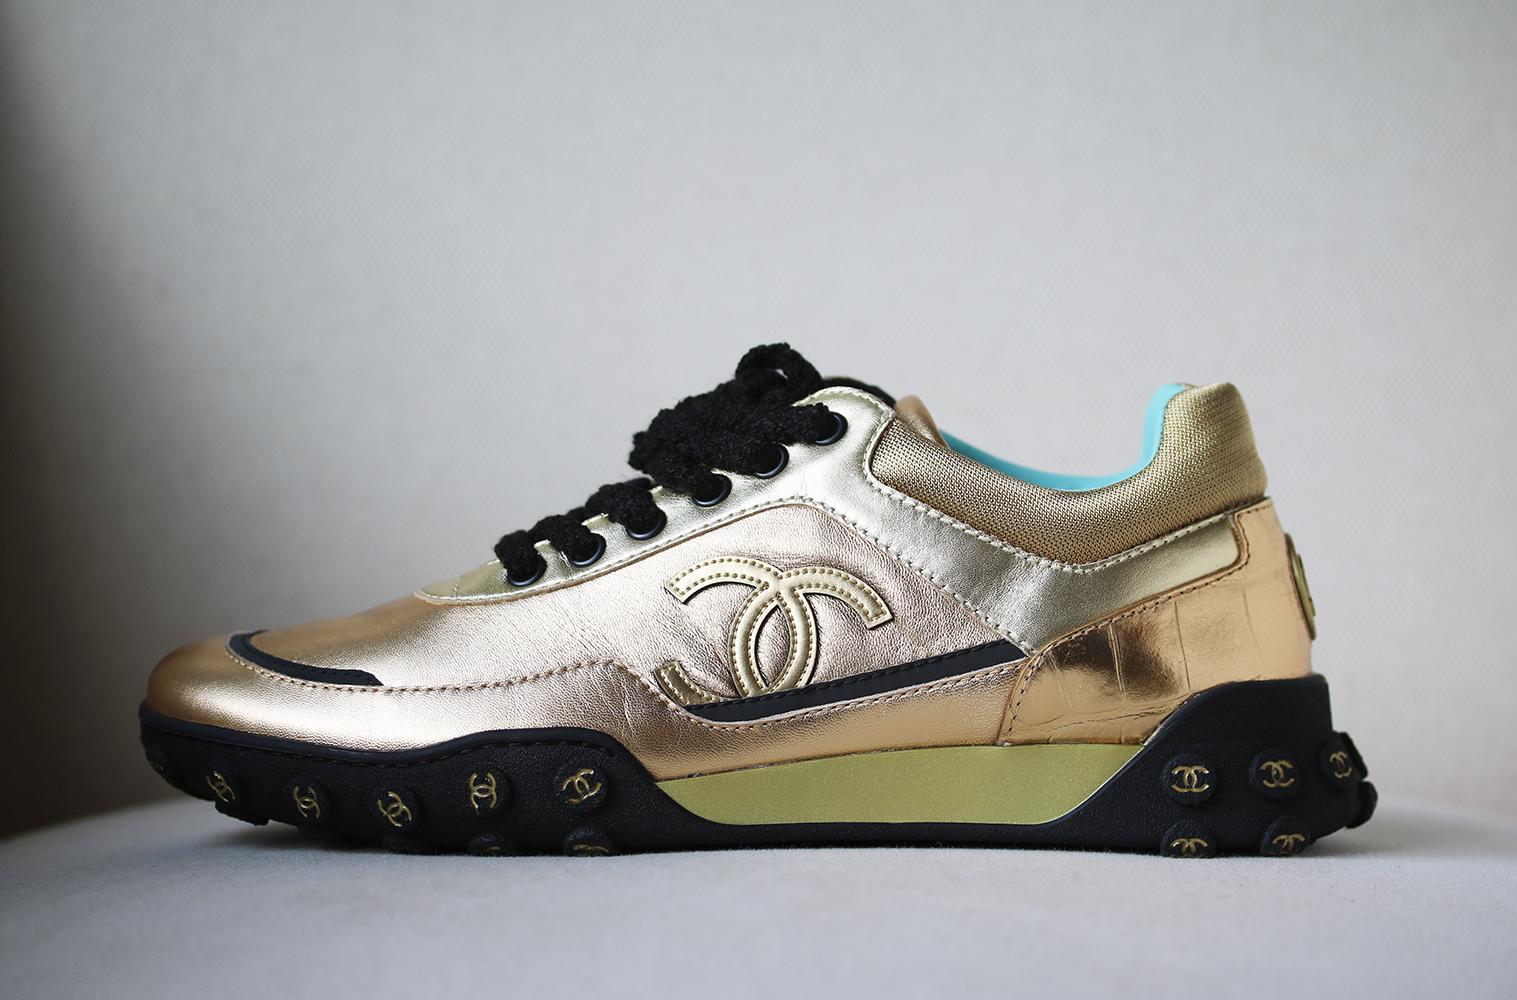 Chanel's trainers are embellished with a playful logo spelling the label's name - the metallic gold colors really pop against the black contrast. The mix of rubber, smooth leather and textured fabric creates a cool tactile contrast. Thanks to the